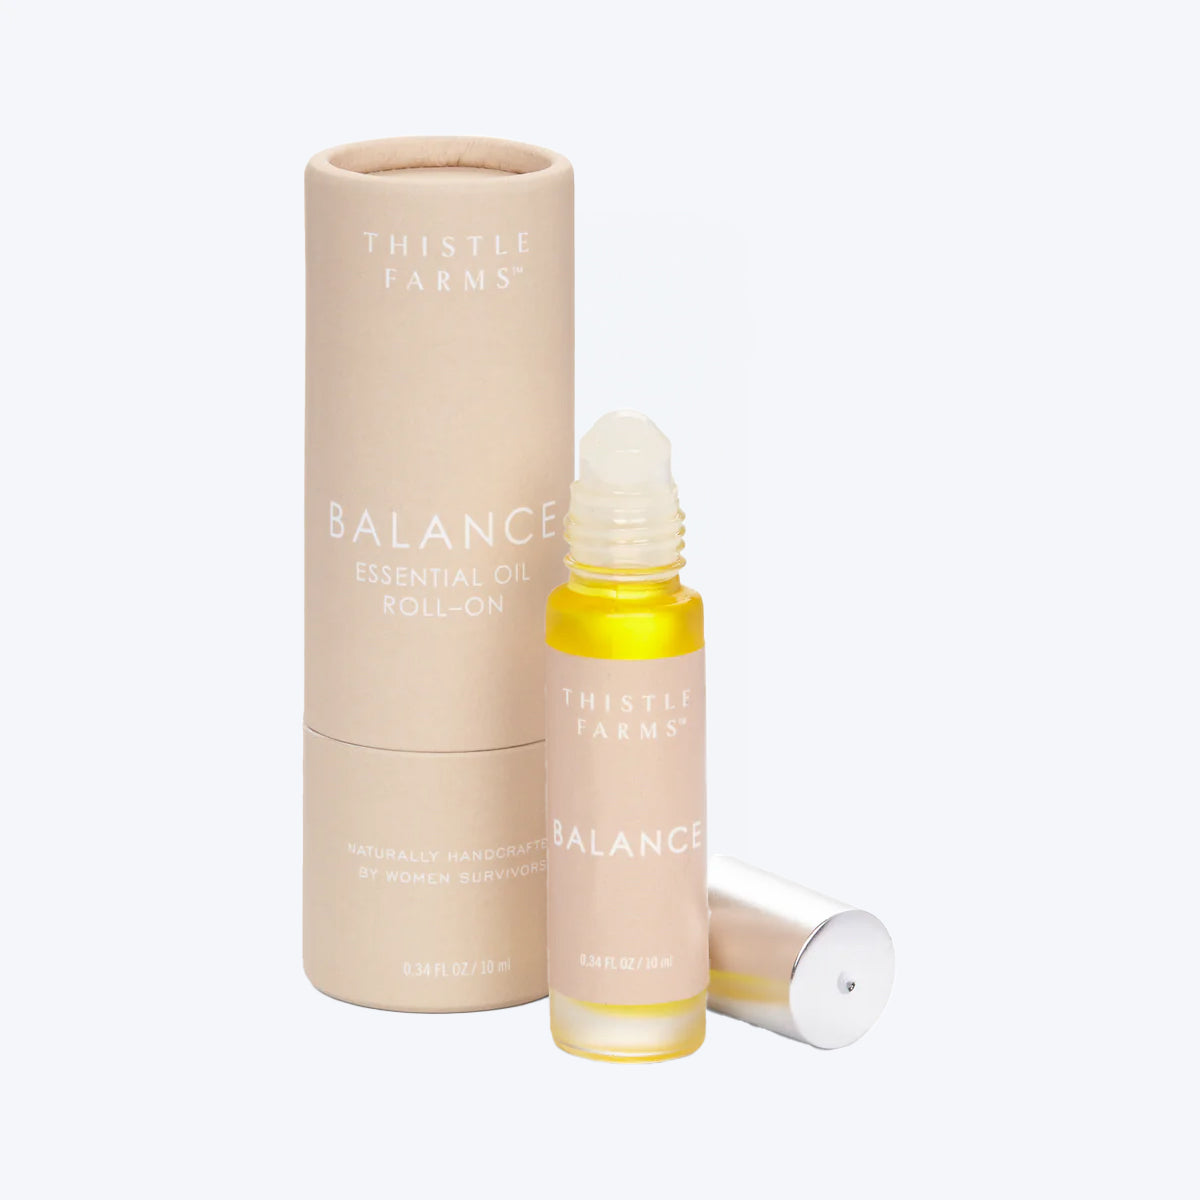 Balance essential oil roll on by Thistle Farms